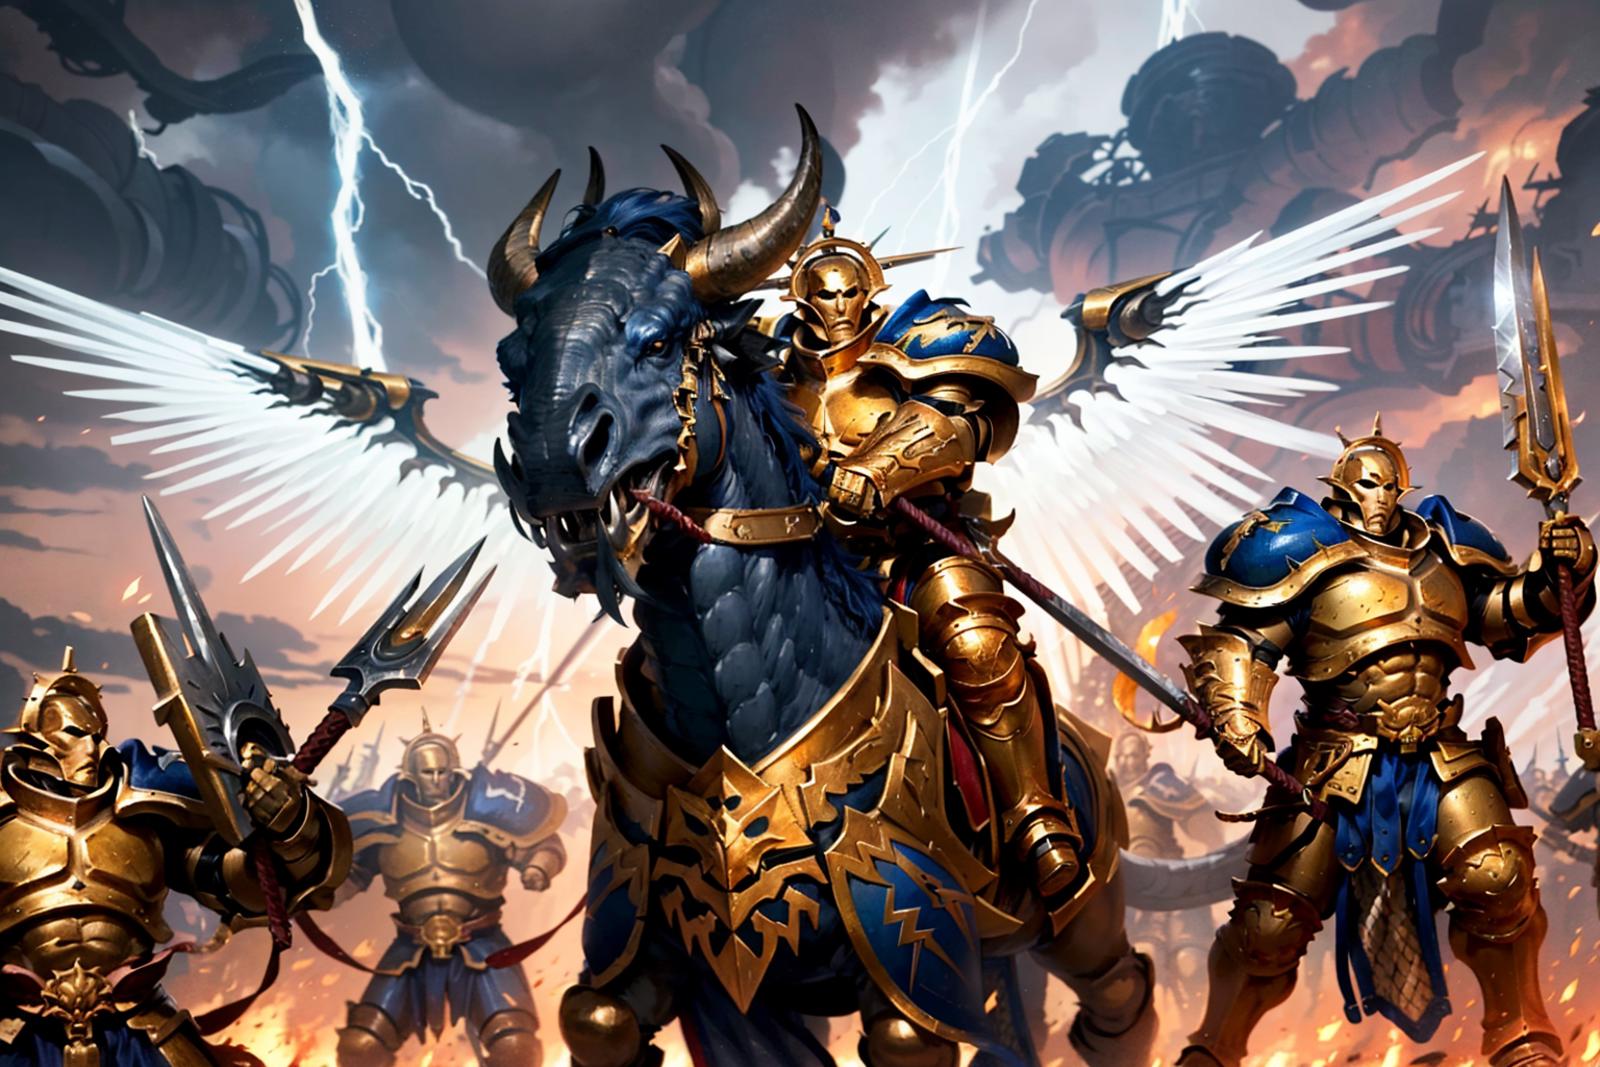 The Stormcast Eternals image by ccaraxess